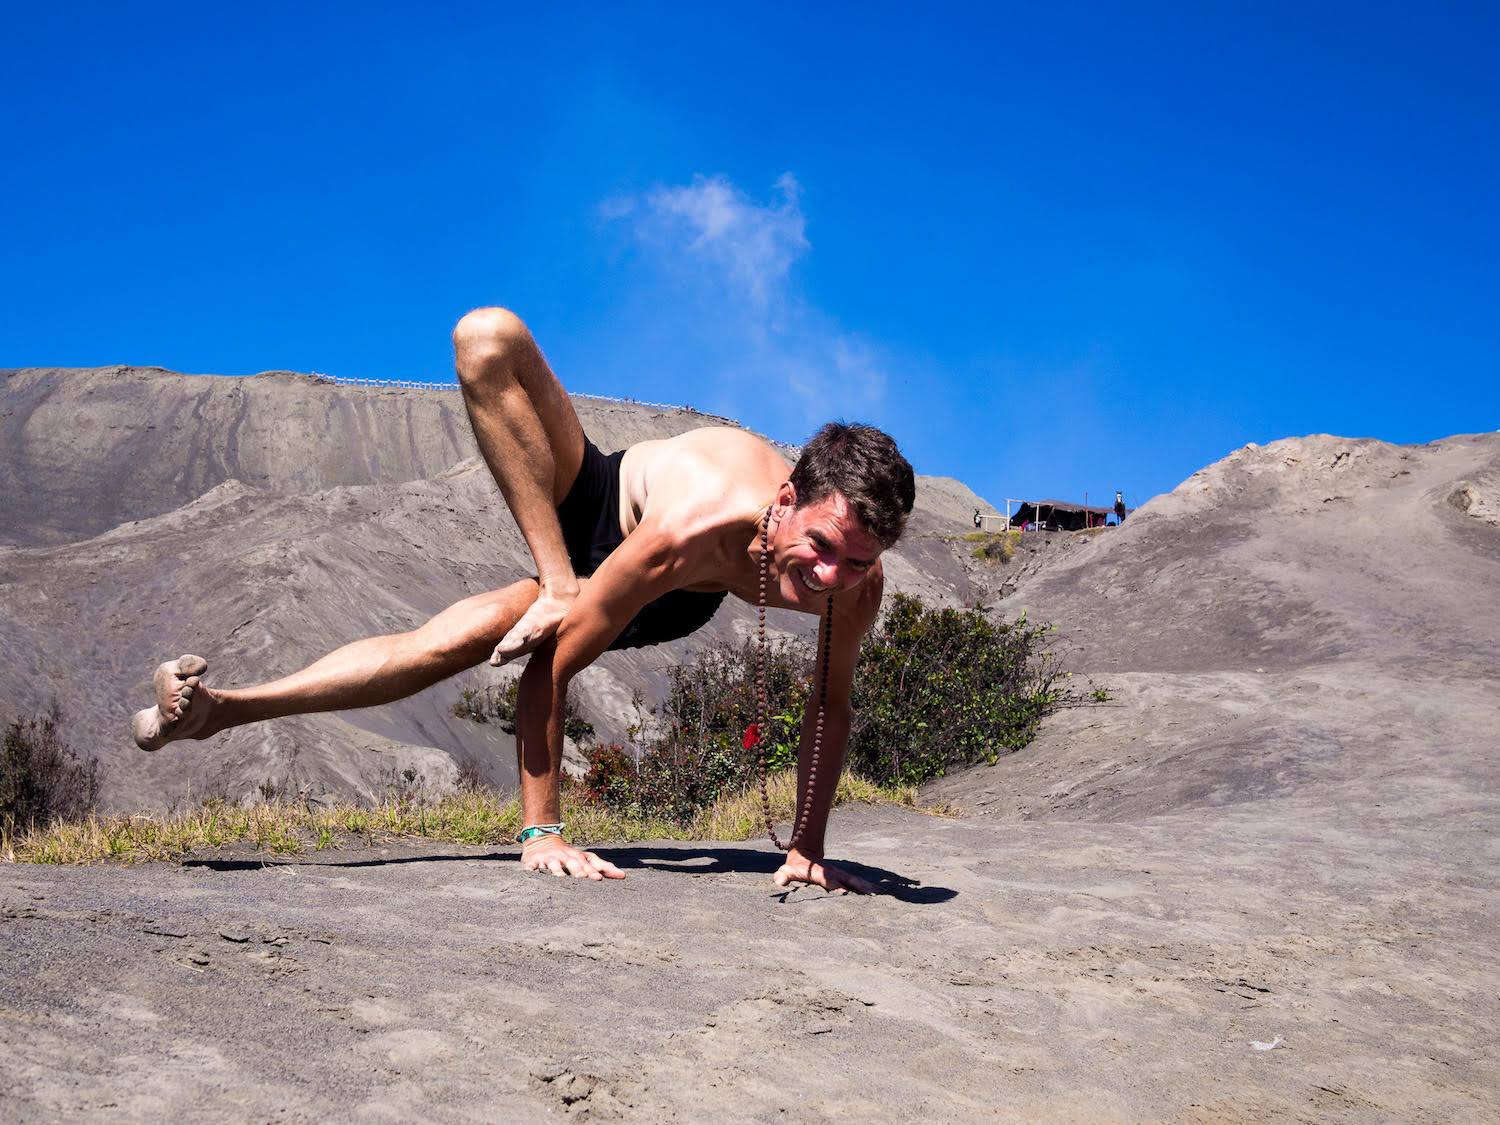 Stephen doing a little outdoor yoga at Mount Bromo, Indonesia.